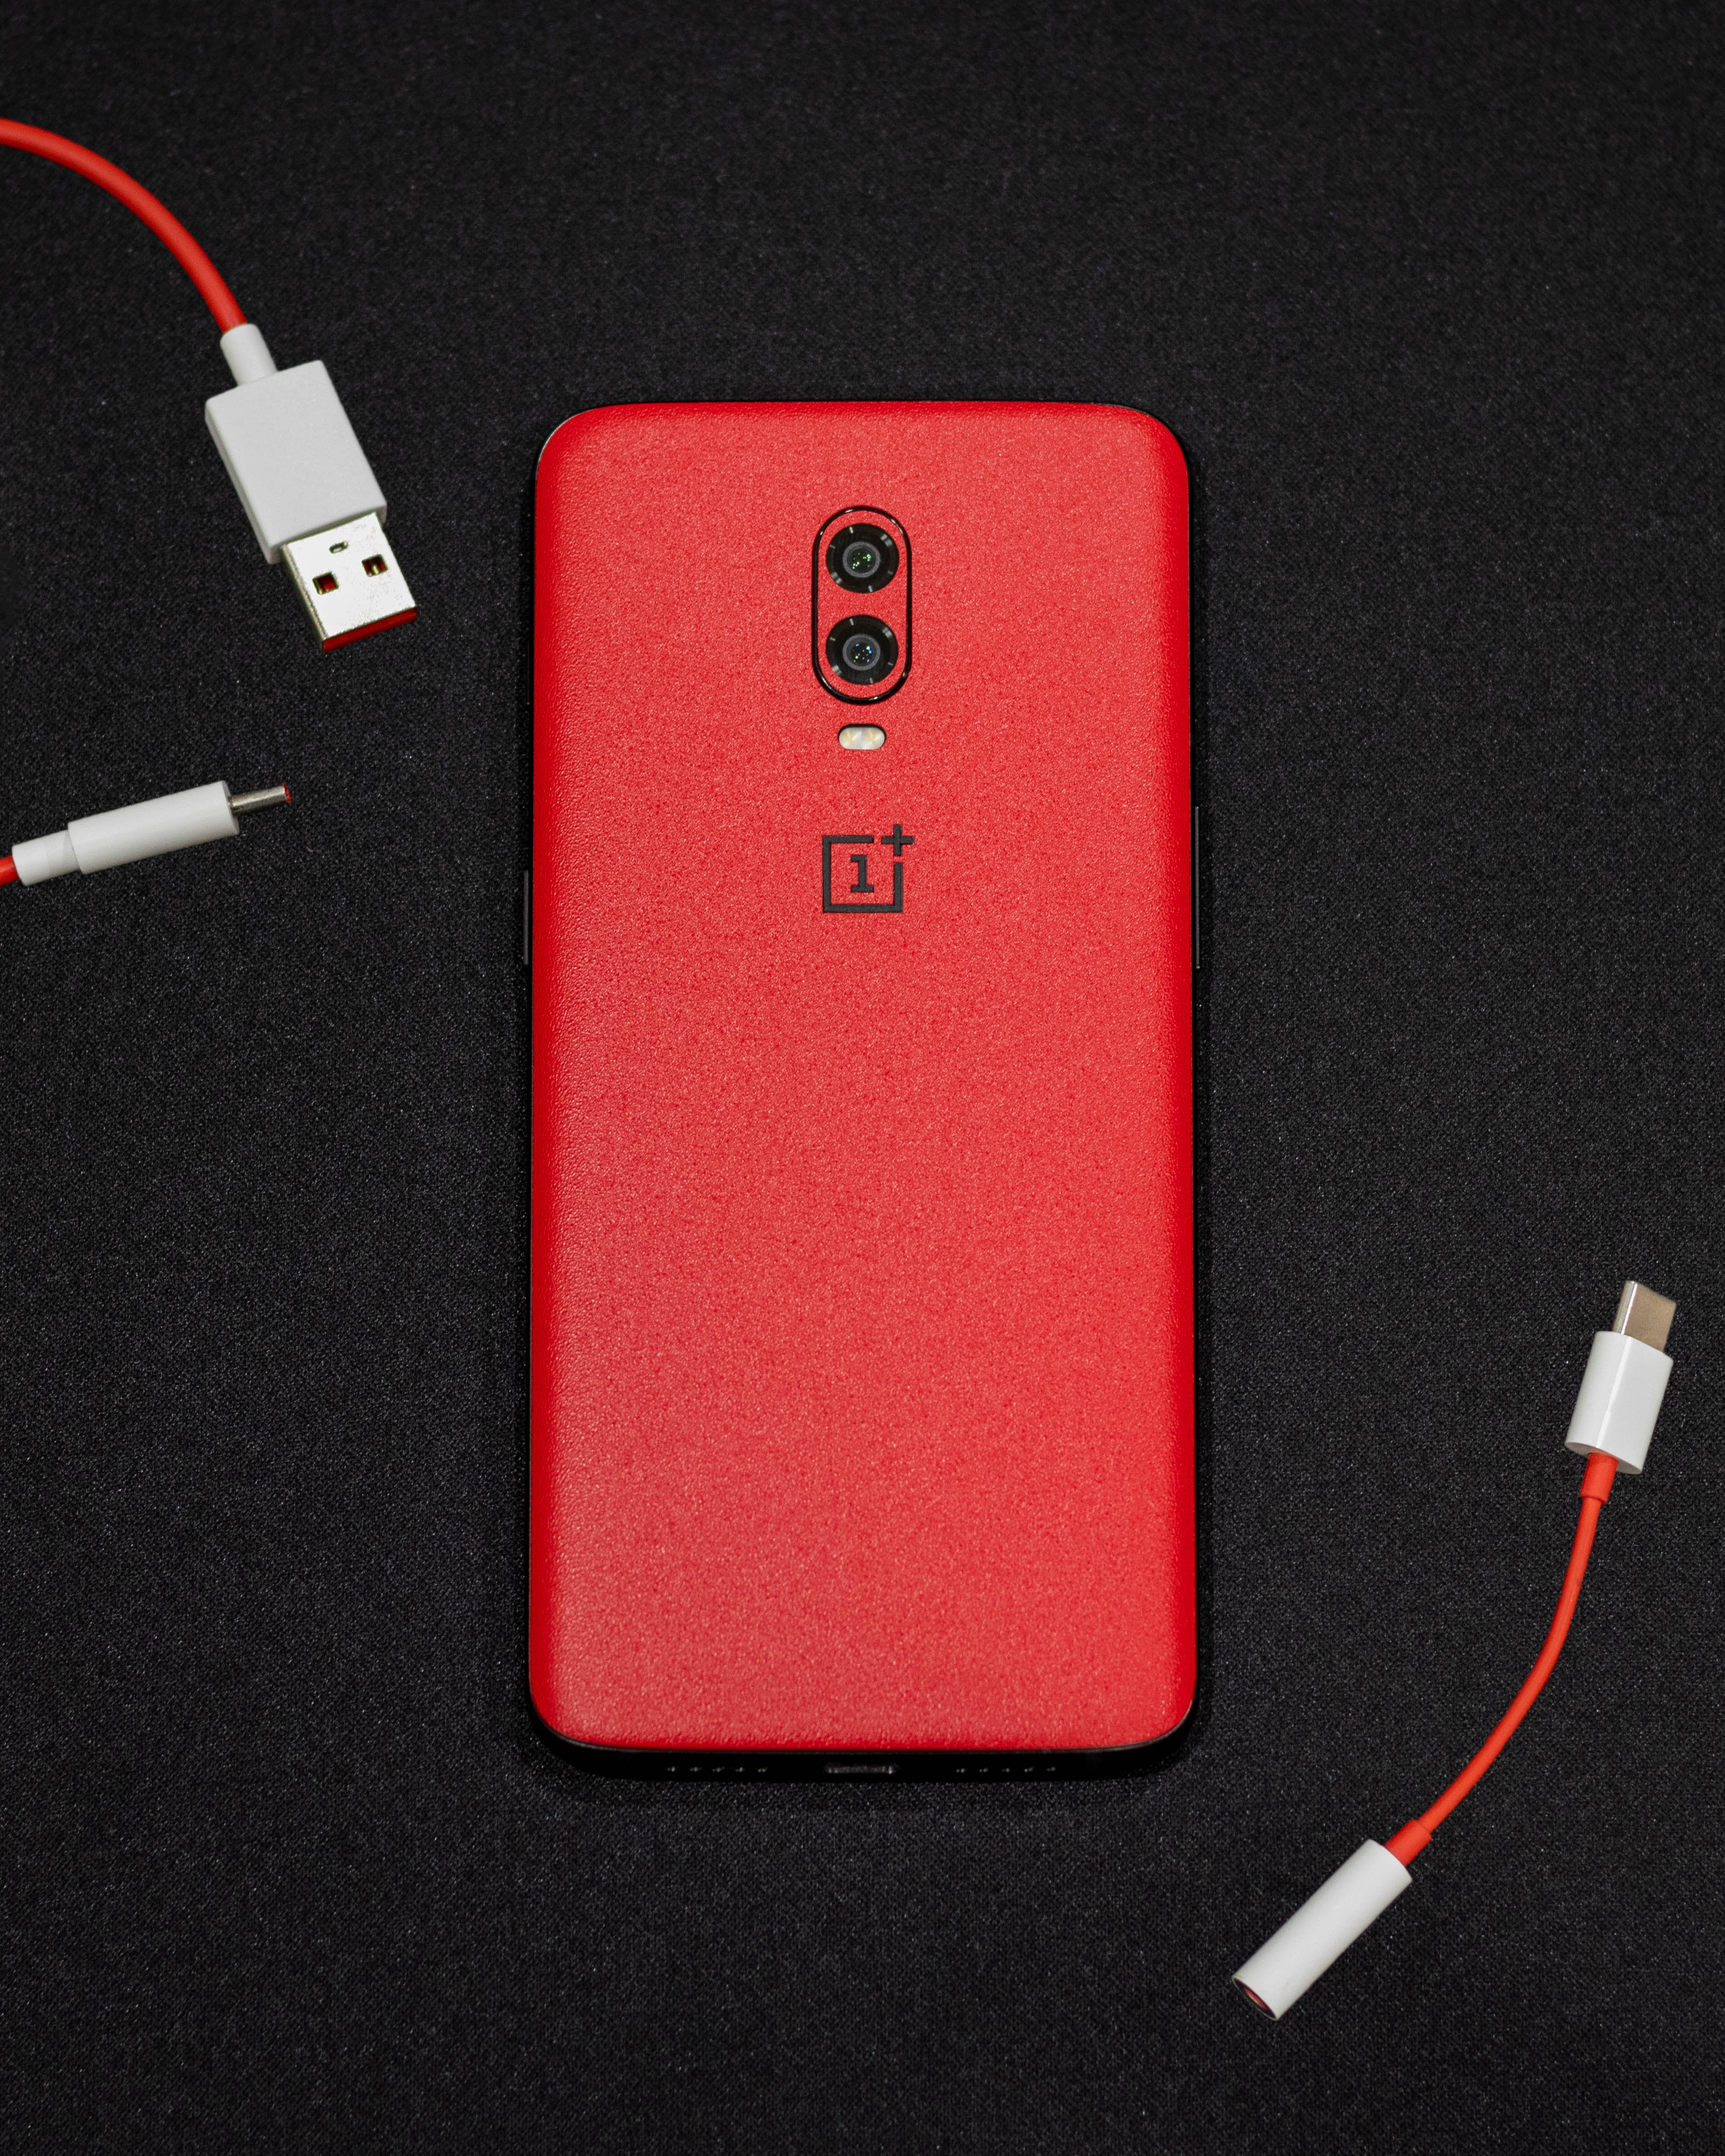 OnePlus released a new Open Beta Update for OnePlus 6/6T